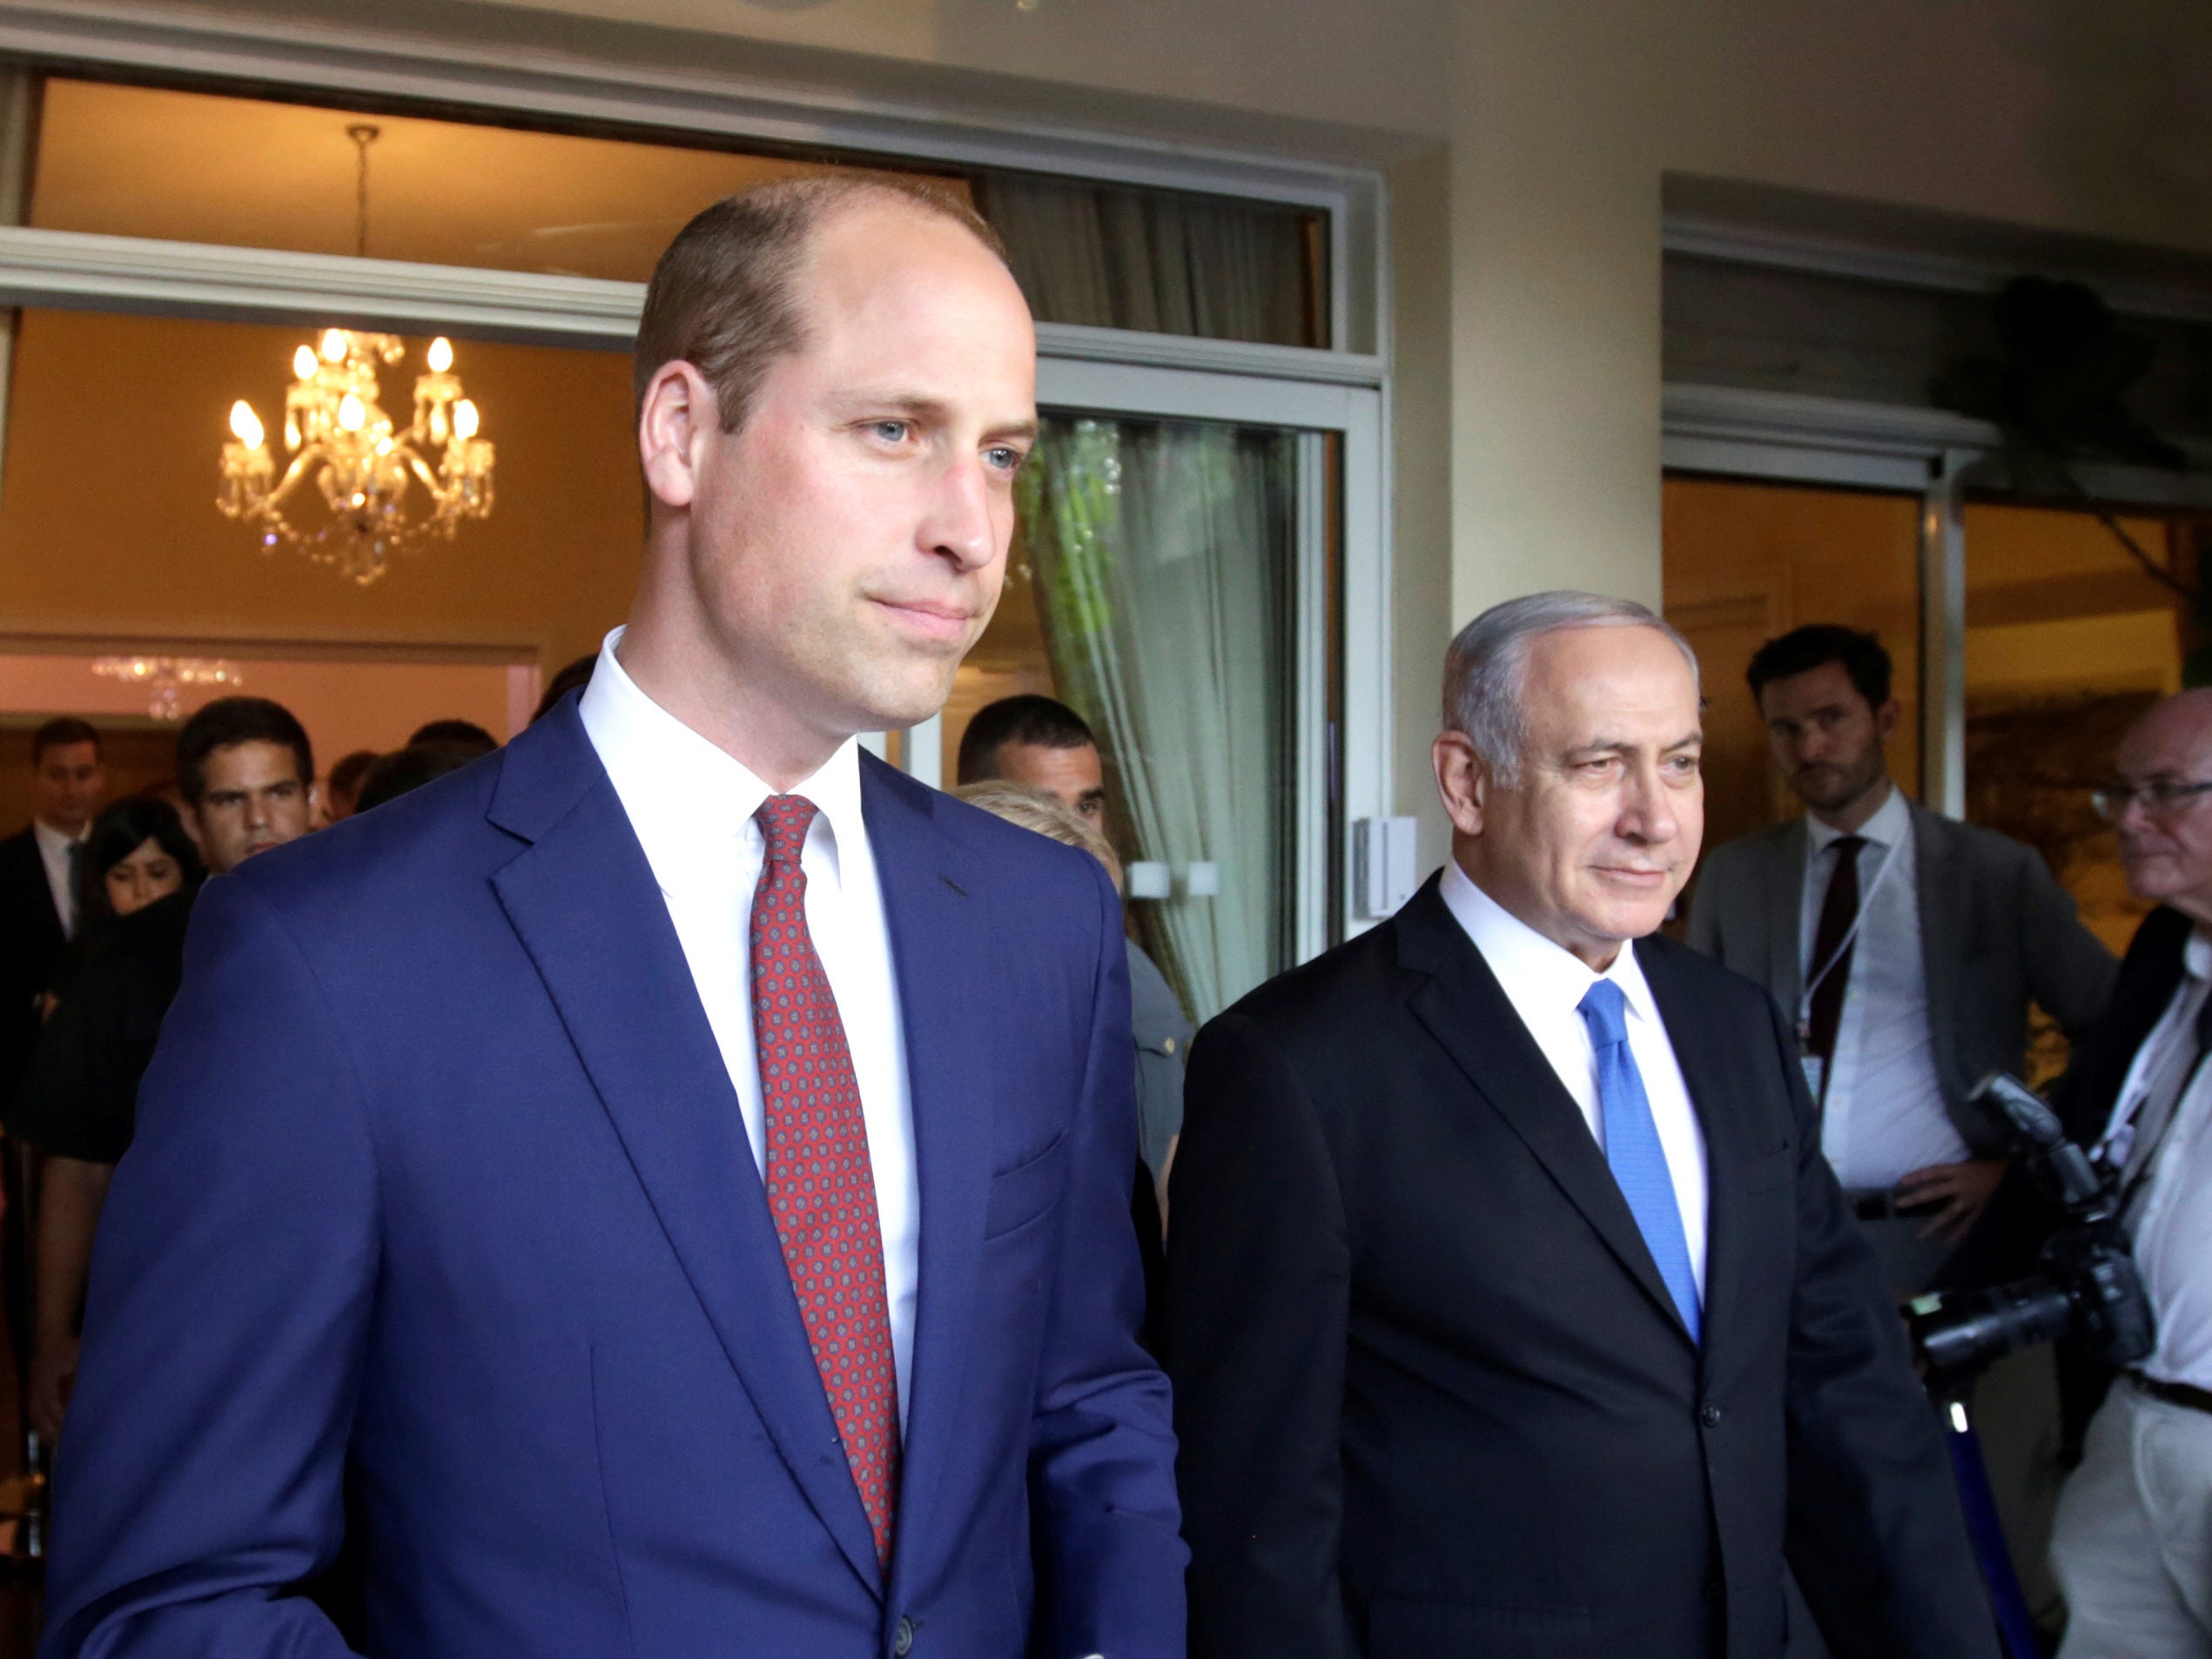 Security barred accredited AP journalist from Prince William’s summit with Israeli PM and asked colleagues if he was 'Muslim'